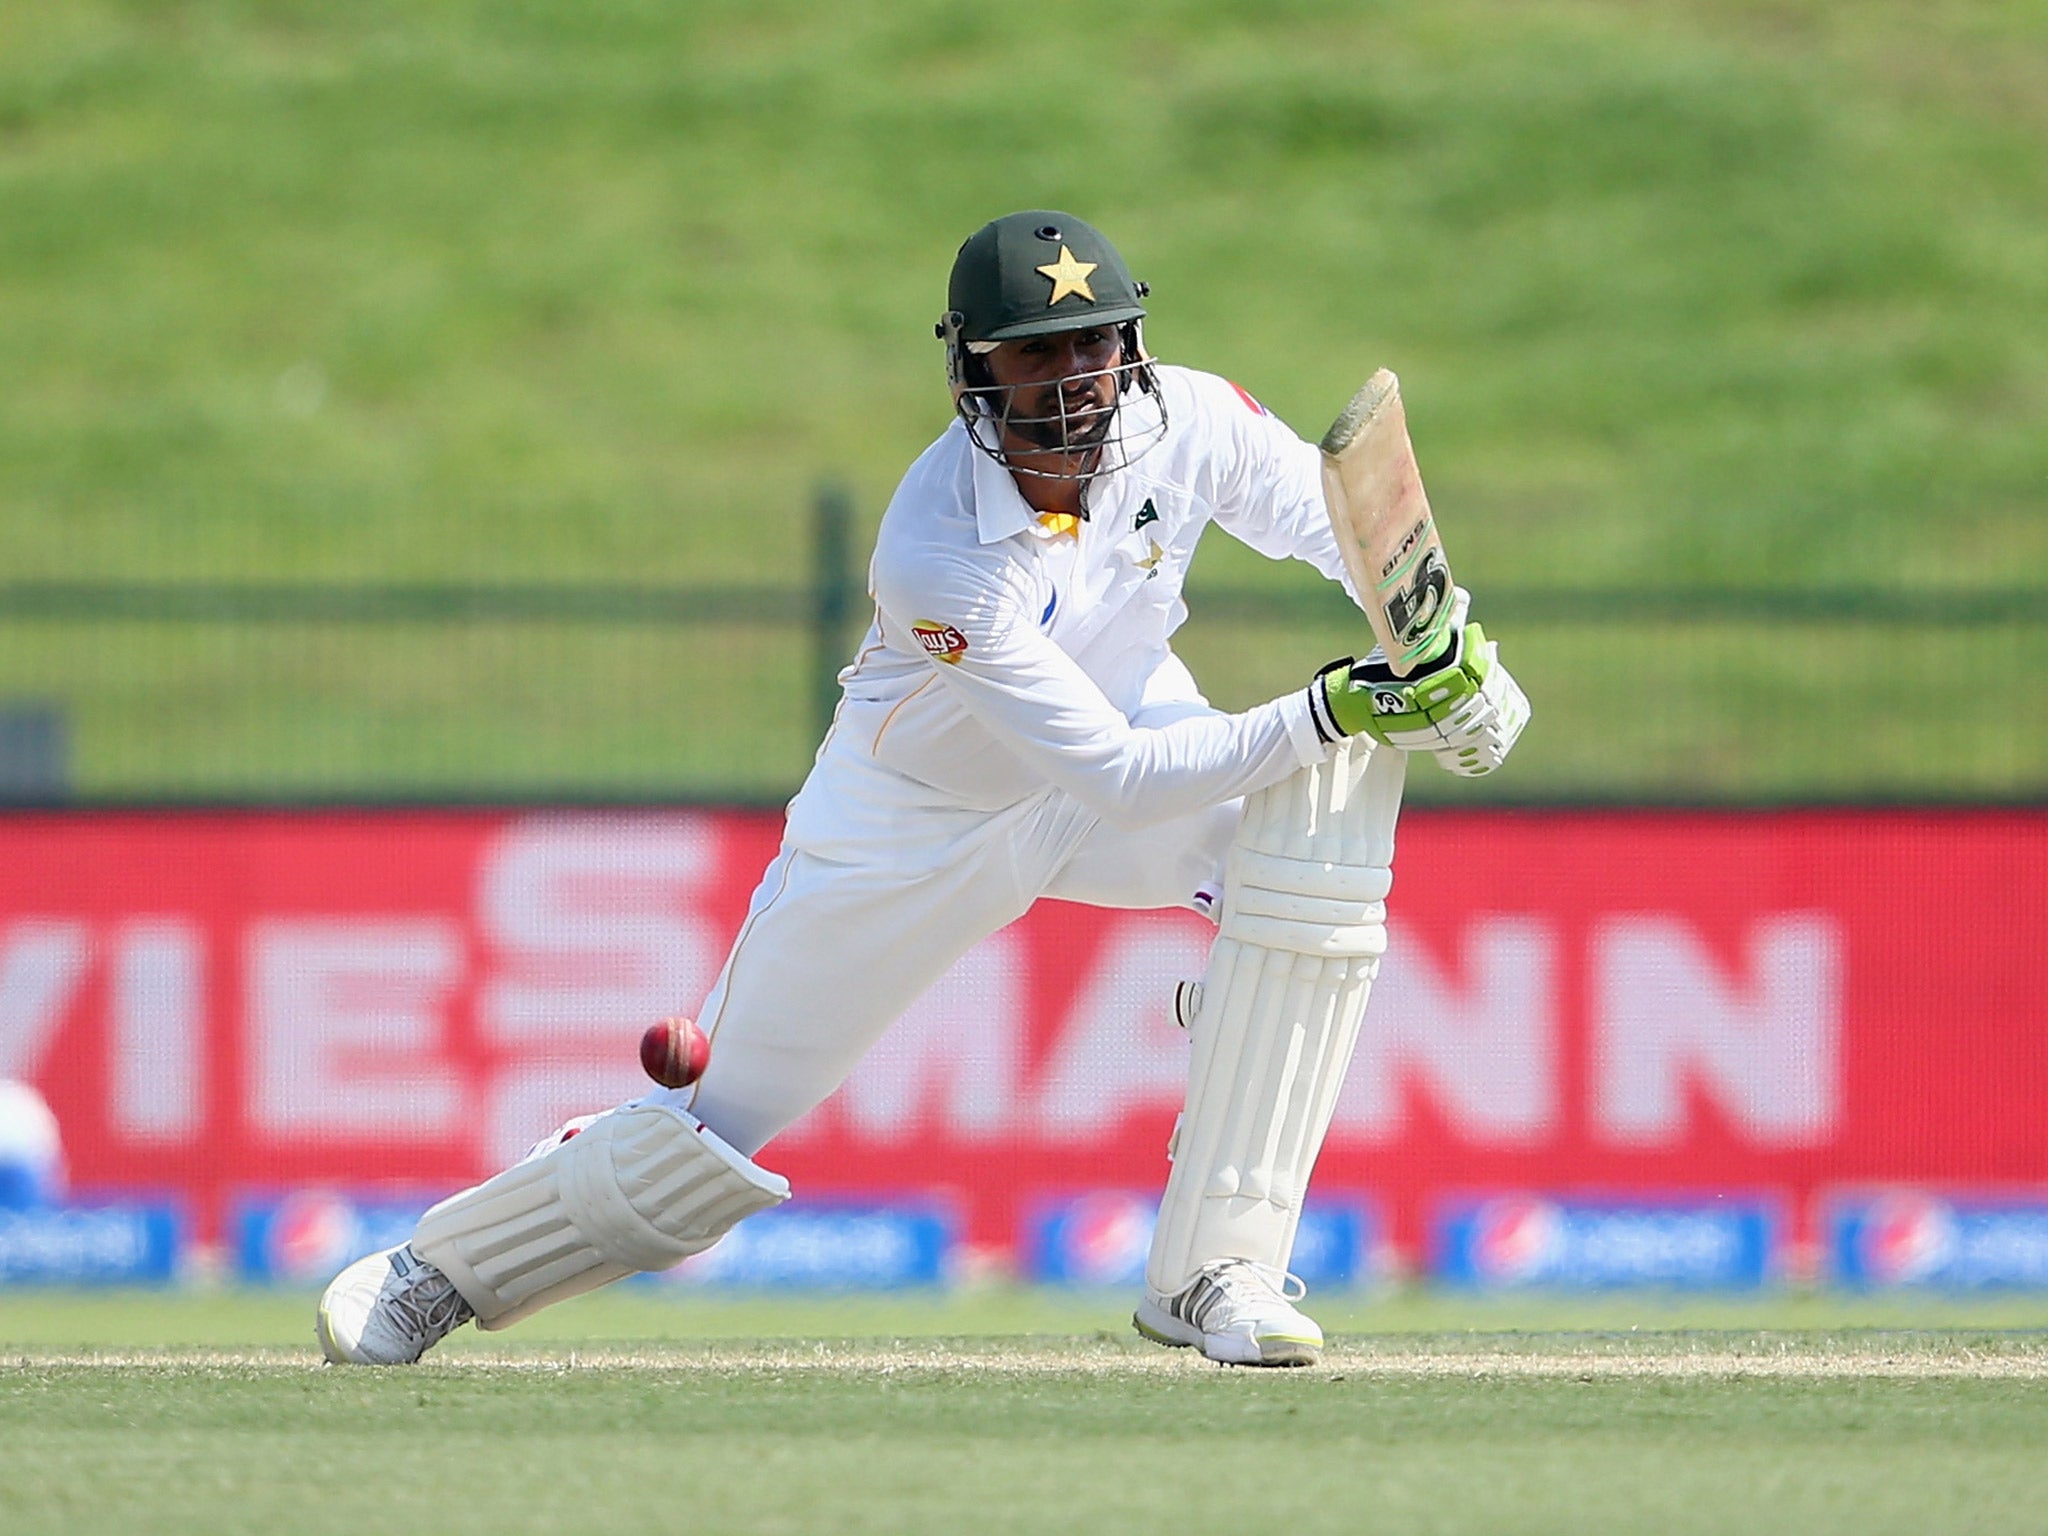 Shoaib drives a shot through the field on the second morning of the First Test